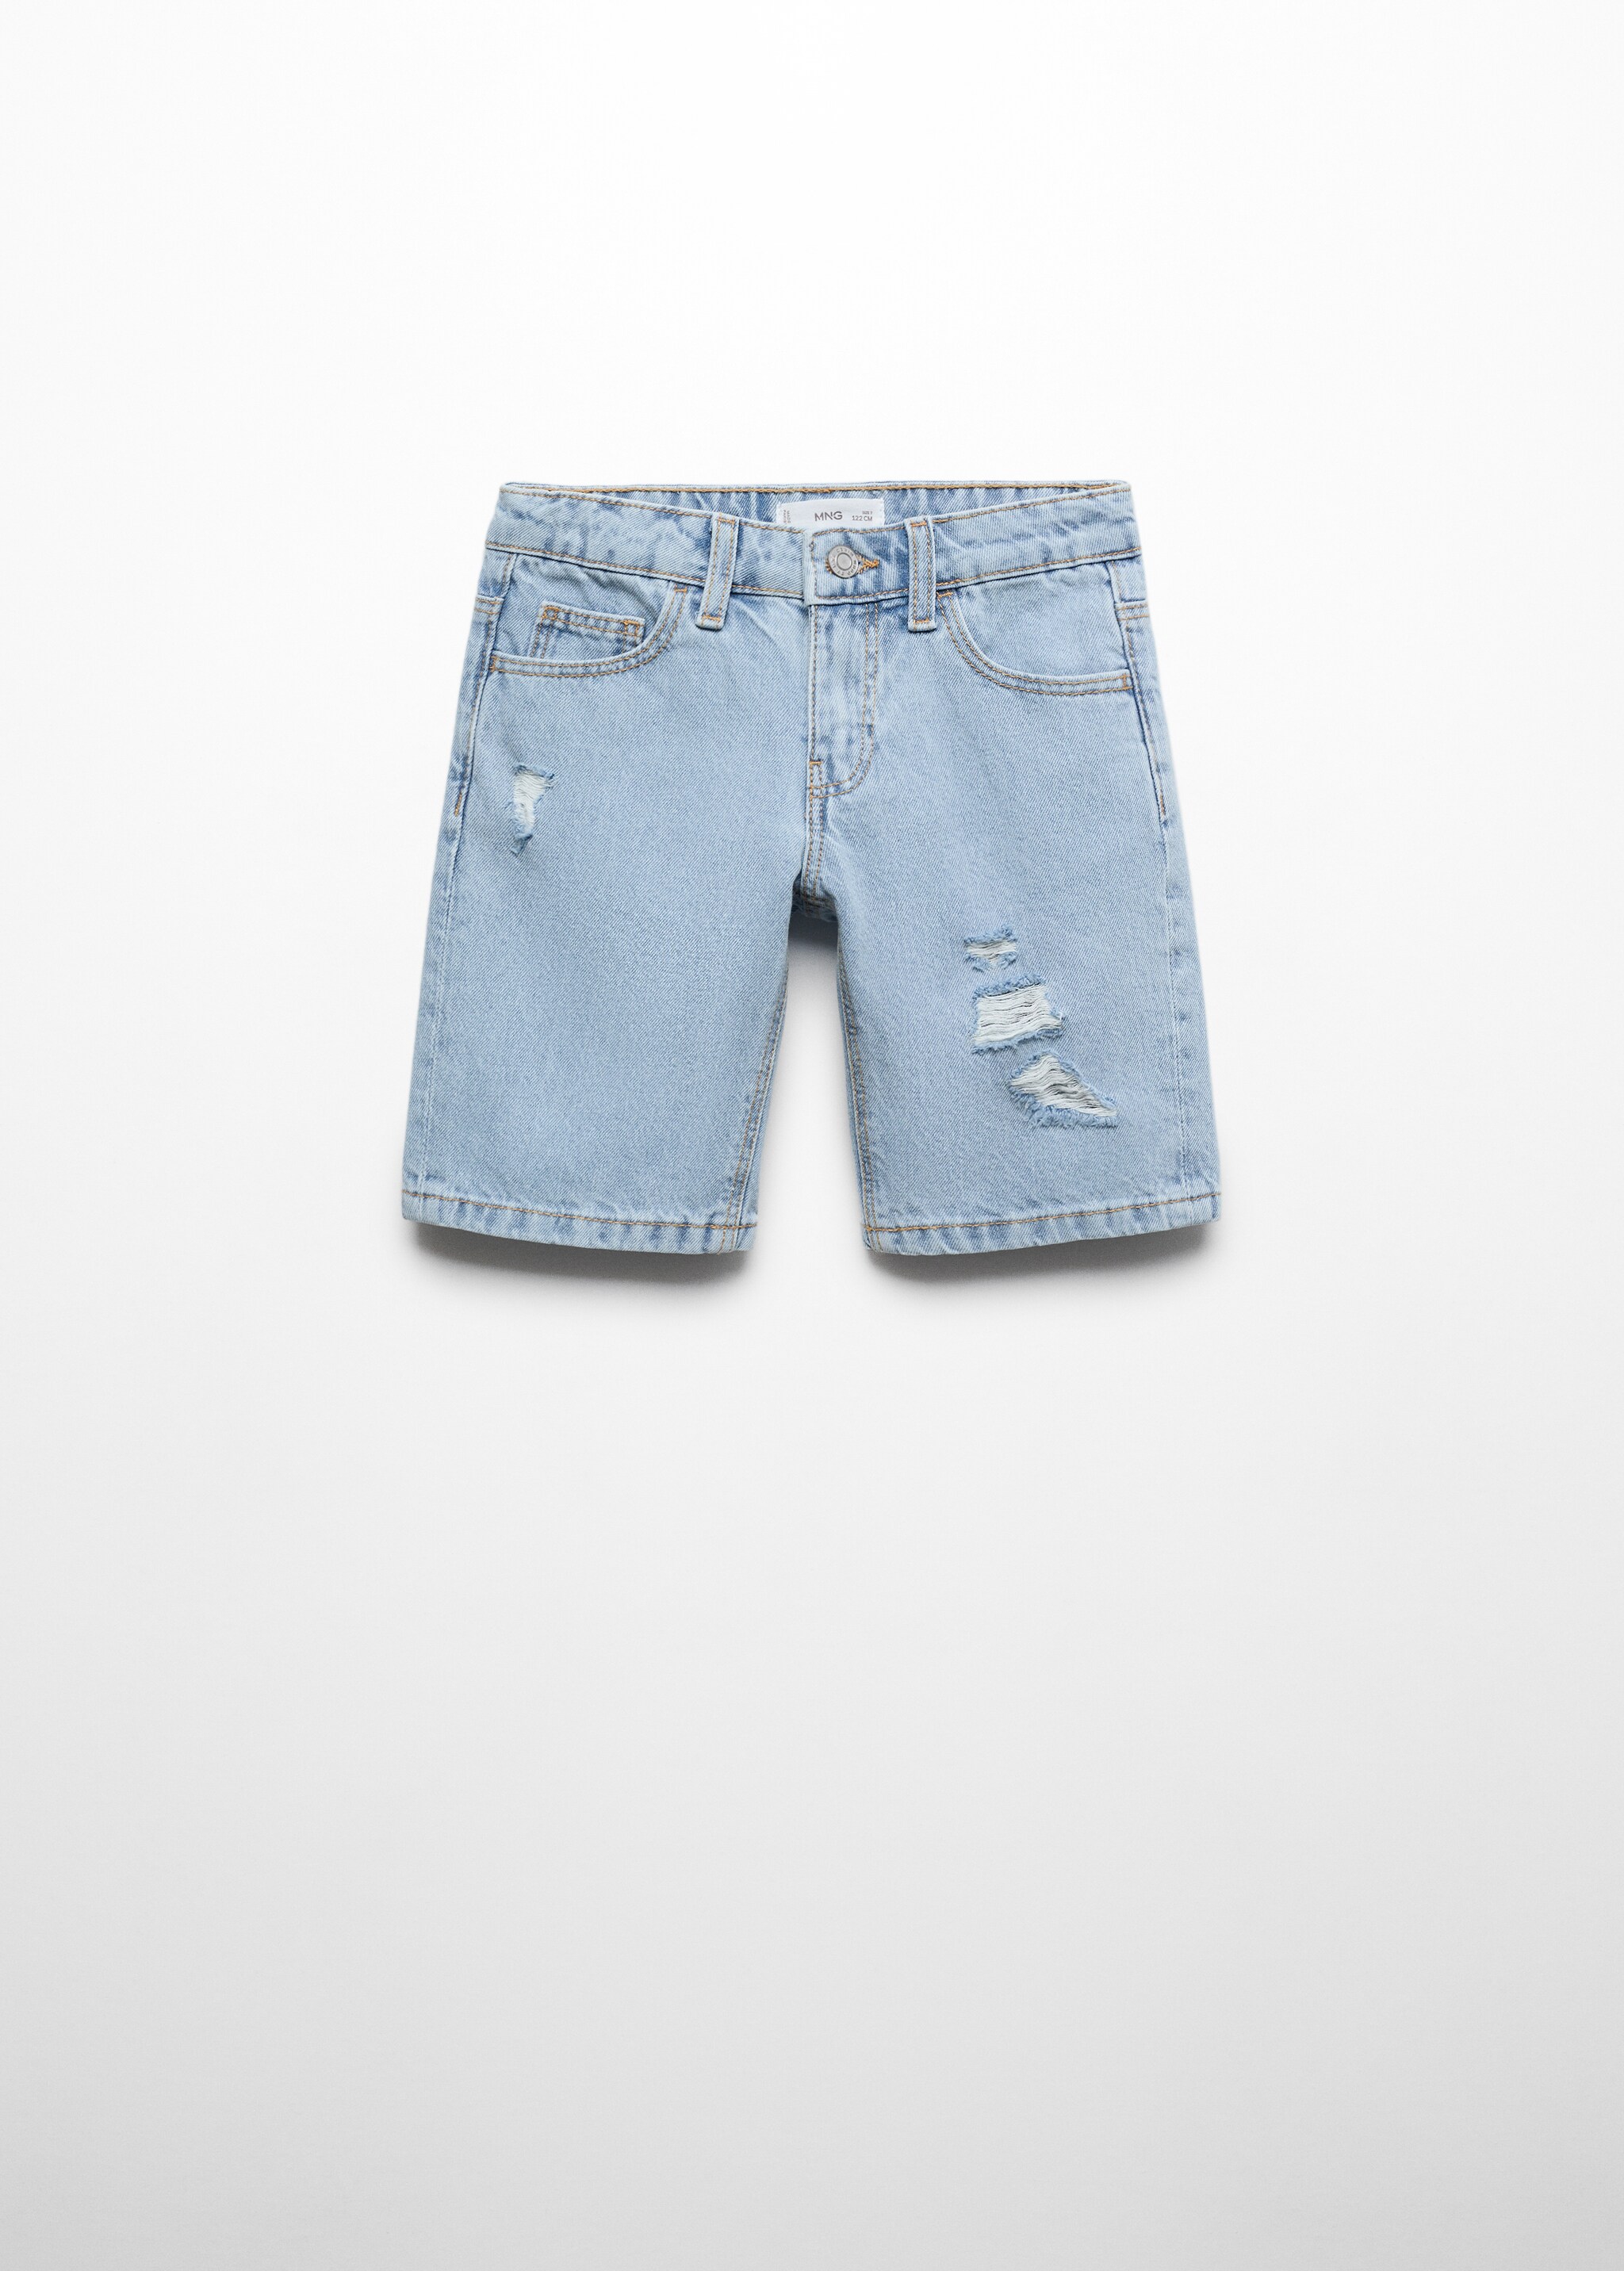 Decorative ripped denim bermuda shorts - Article without model